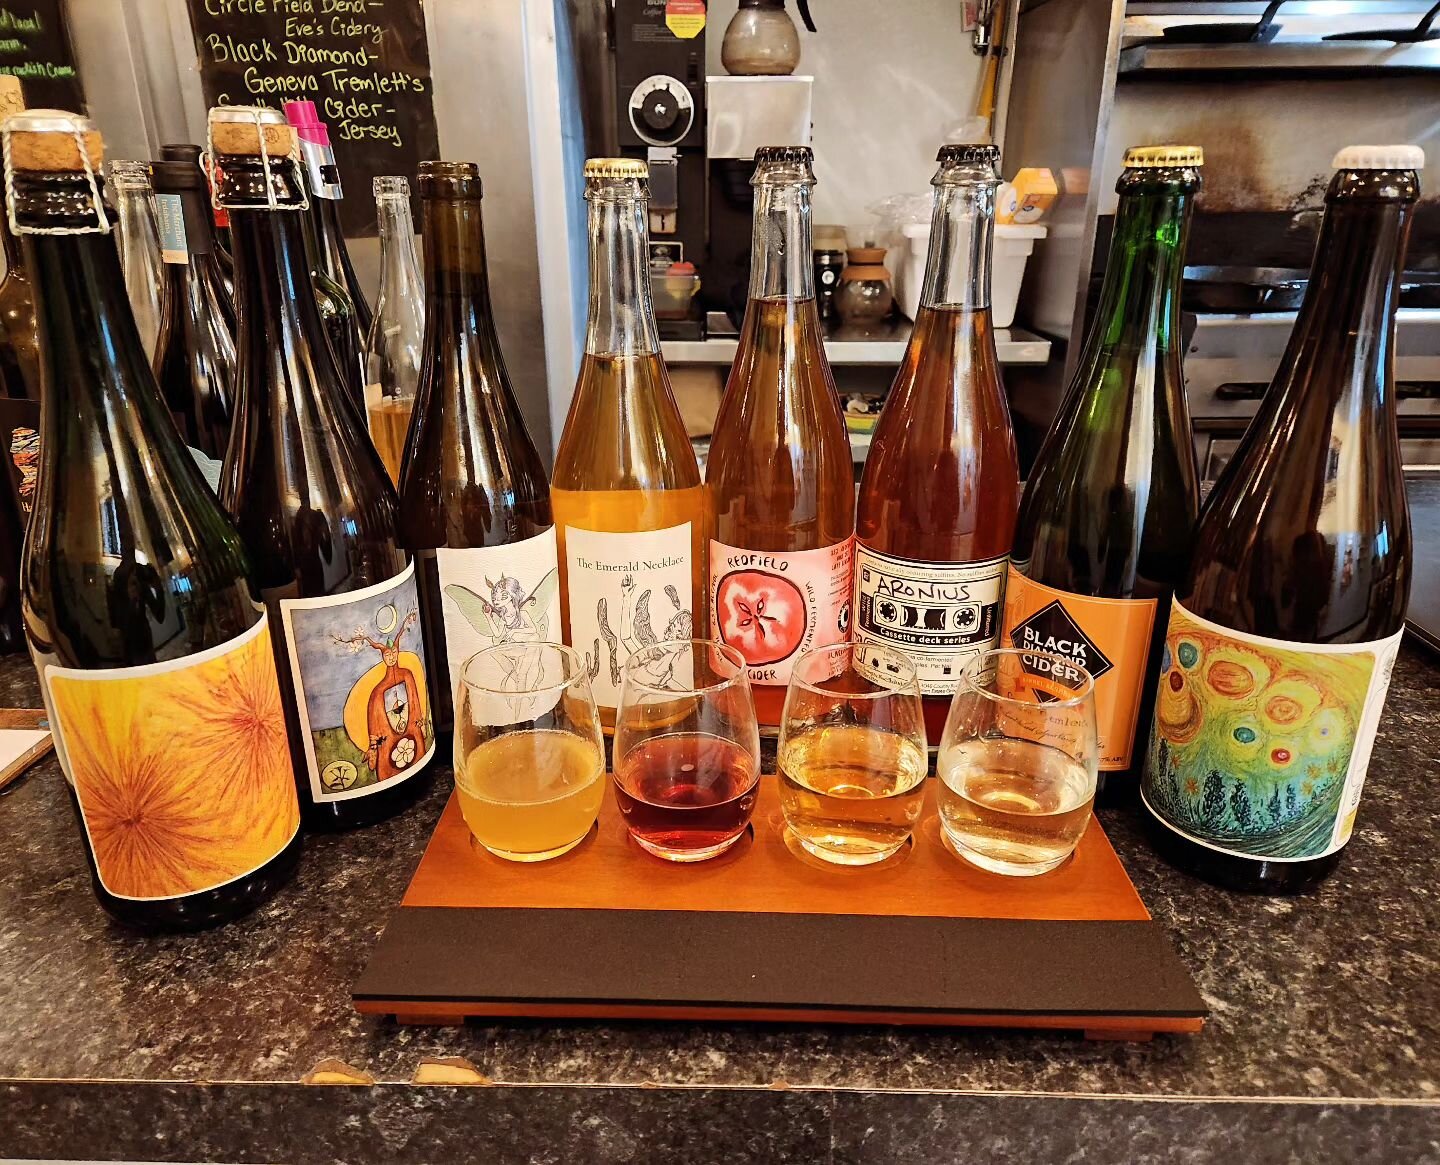 Did you know the Finger Lakes are considered by many to be the Napa of the Cider World?

The Lakes, some of the deepest on the continent, modulate winter temperatures while keeping things cool in the summers. That climate, combined with rich, fertile